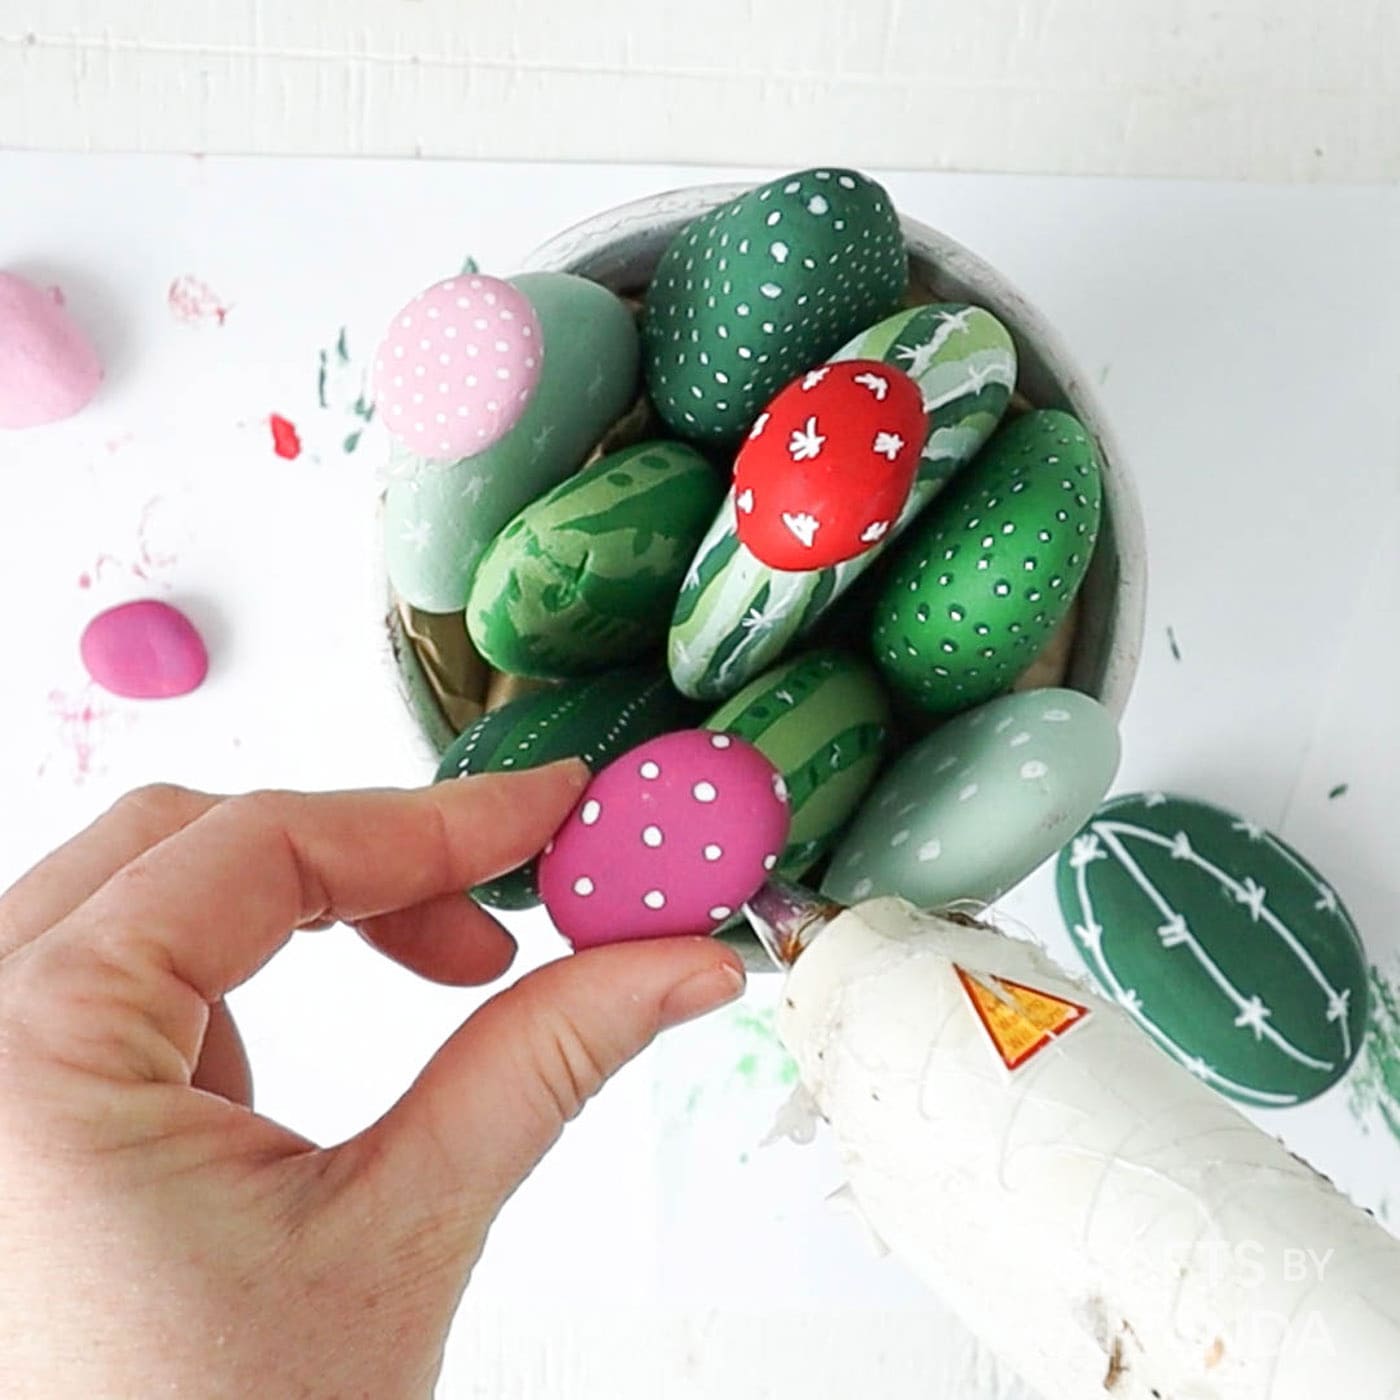 gluing painted rocks into a clay pot